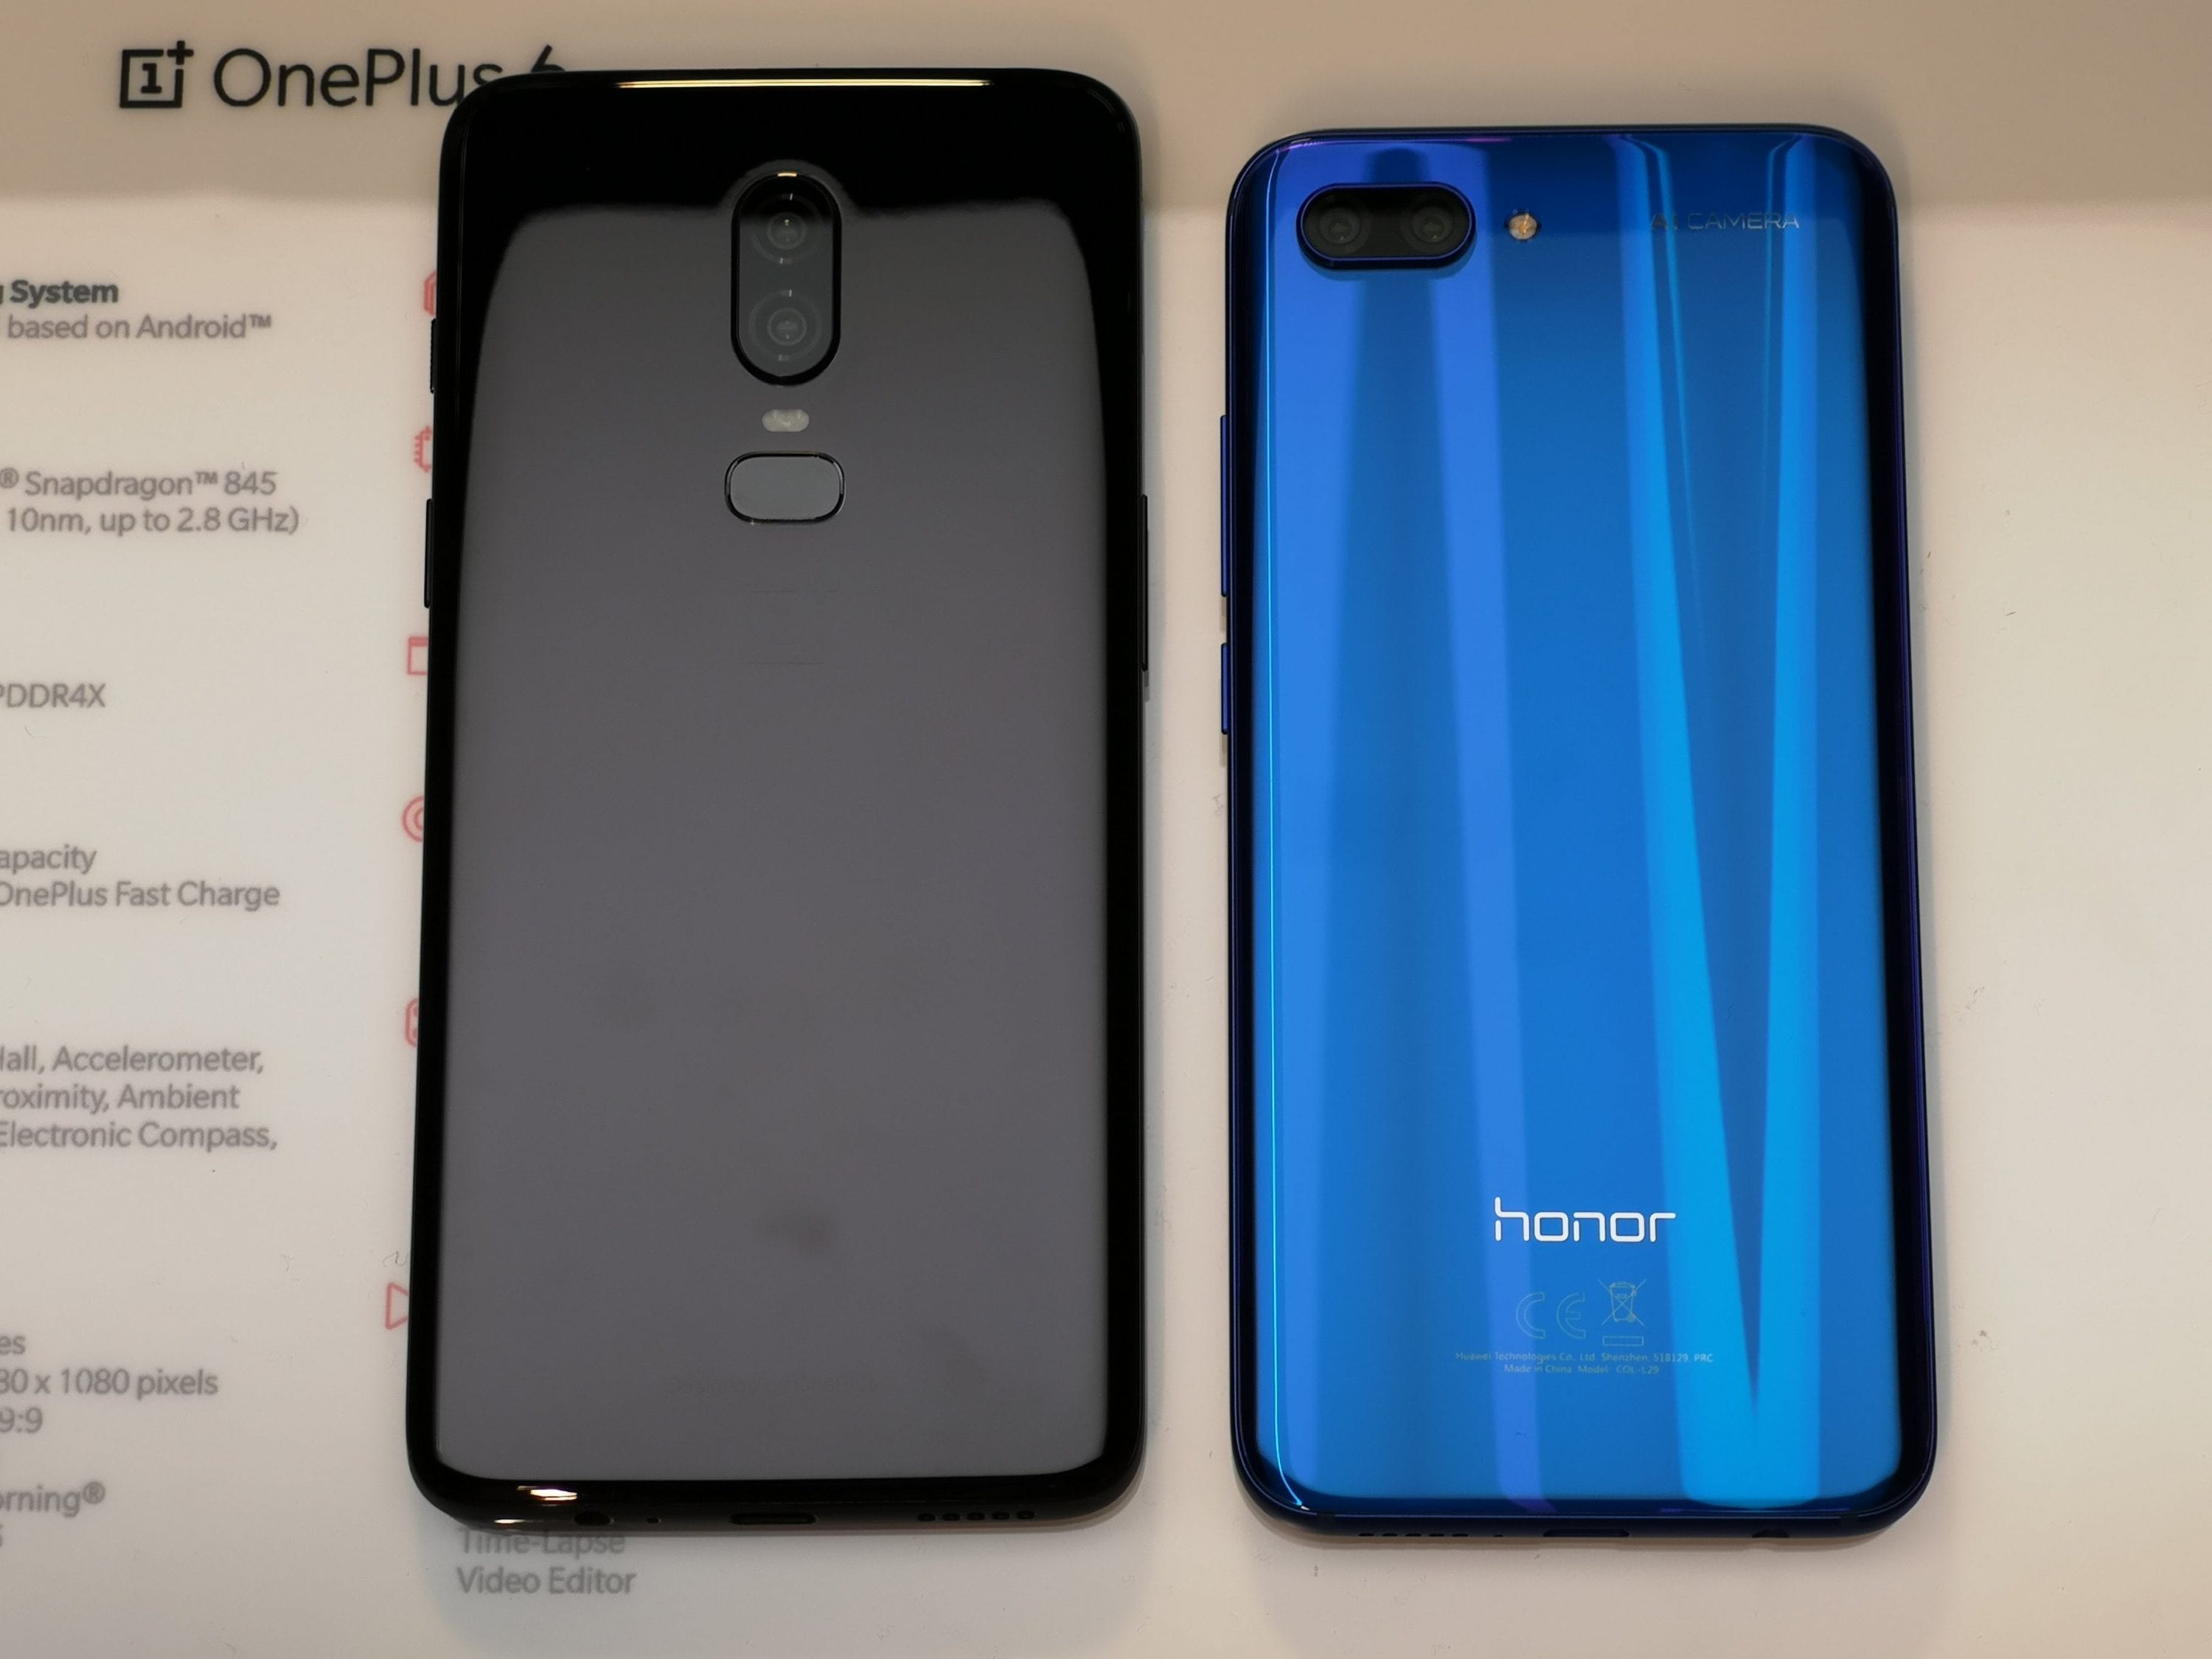 OnePlus 6 and the Honor 10